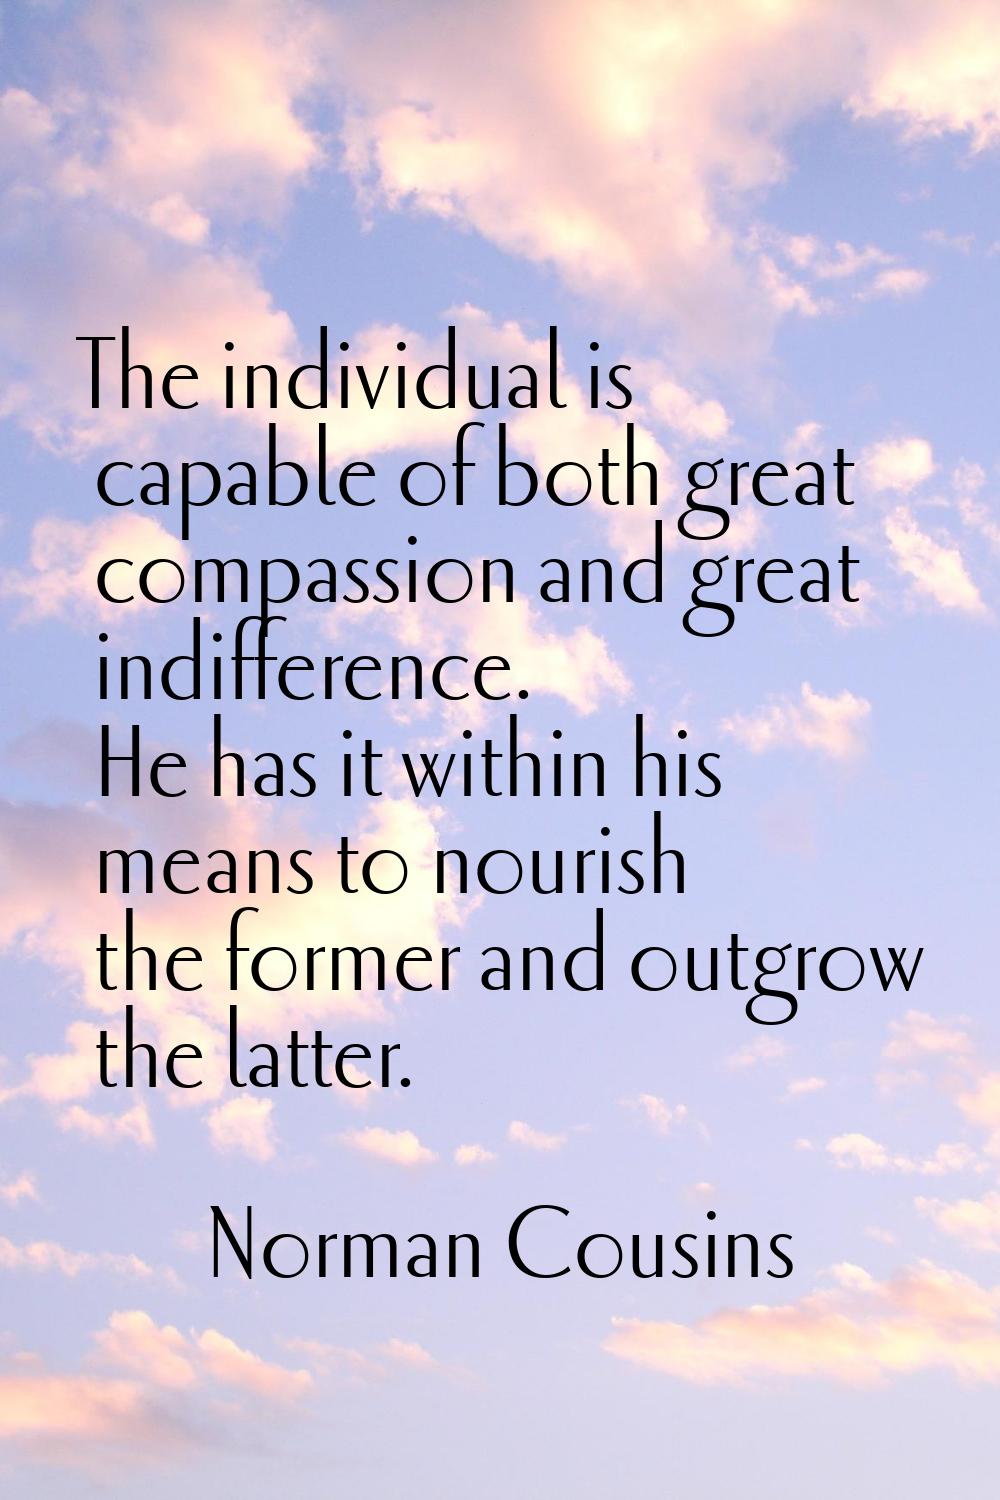 The individual is capable of both great compassion and great indifference. He has it within his mea